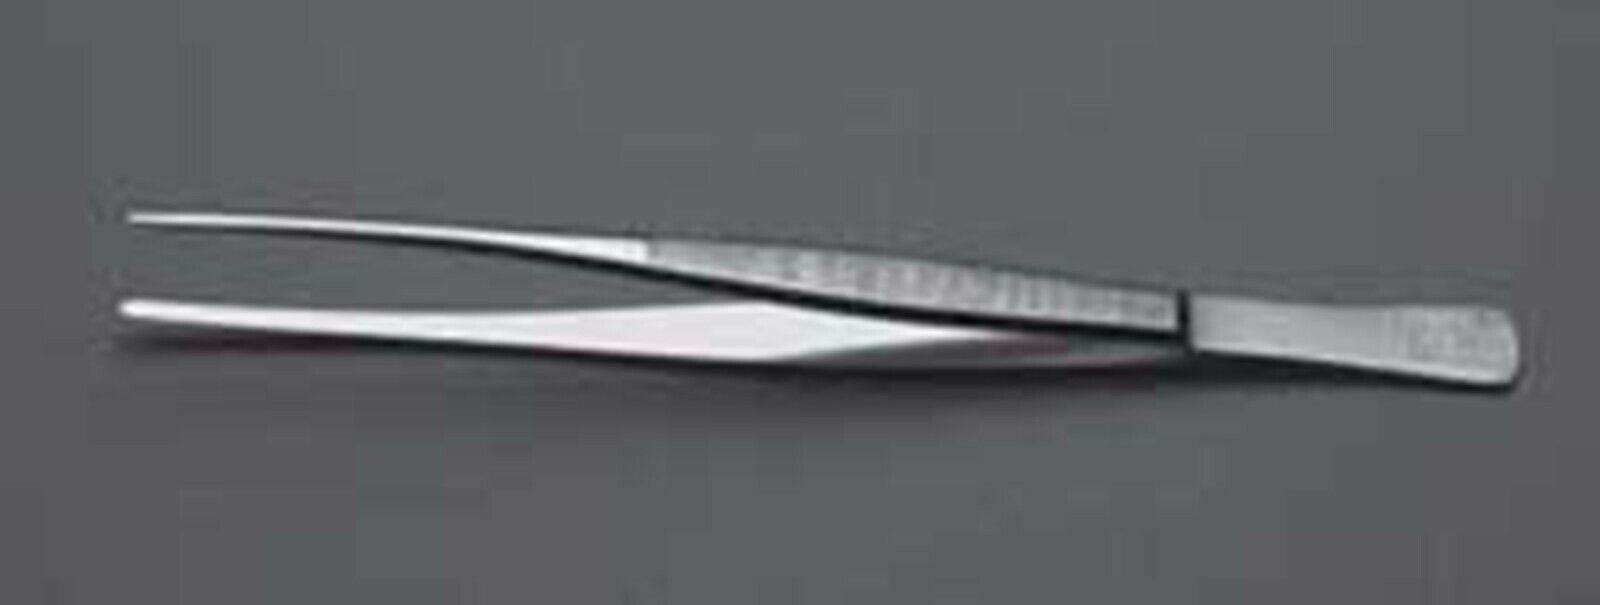 Y Stamp Collecting Tongs / Stamp Tweezers-POINTED-4.75"-new-Free shipping Can/US